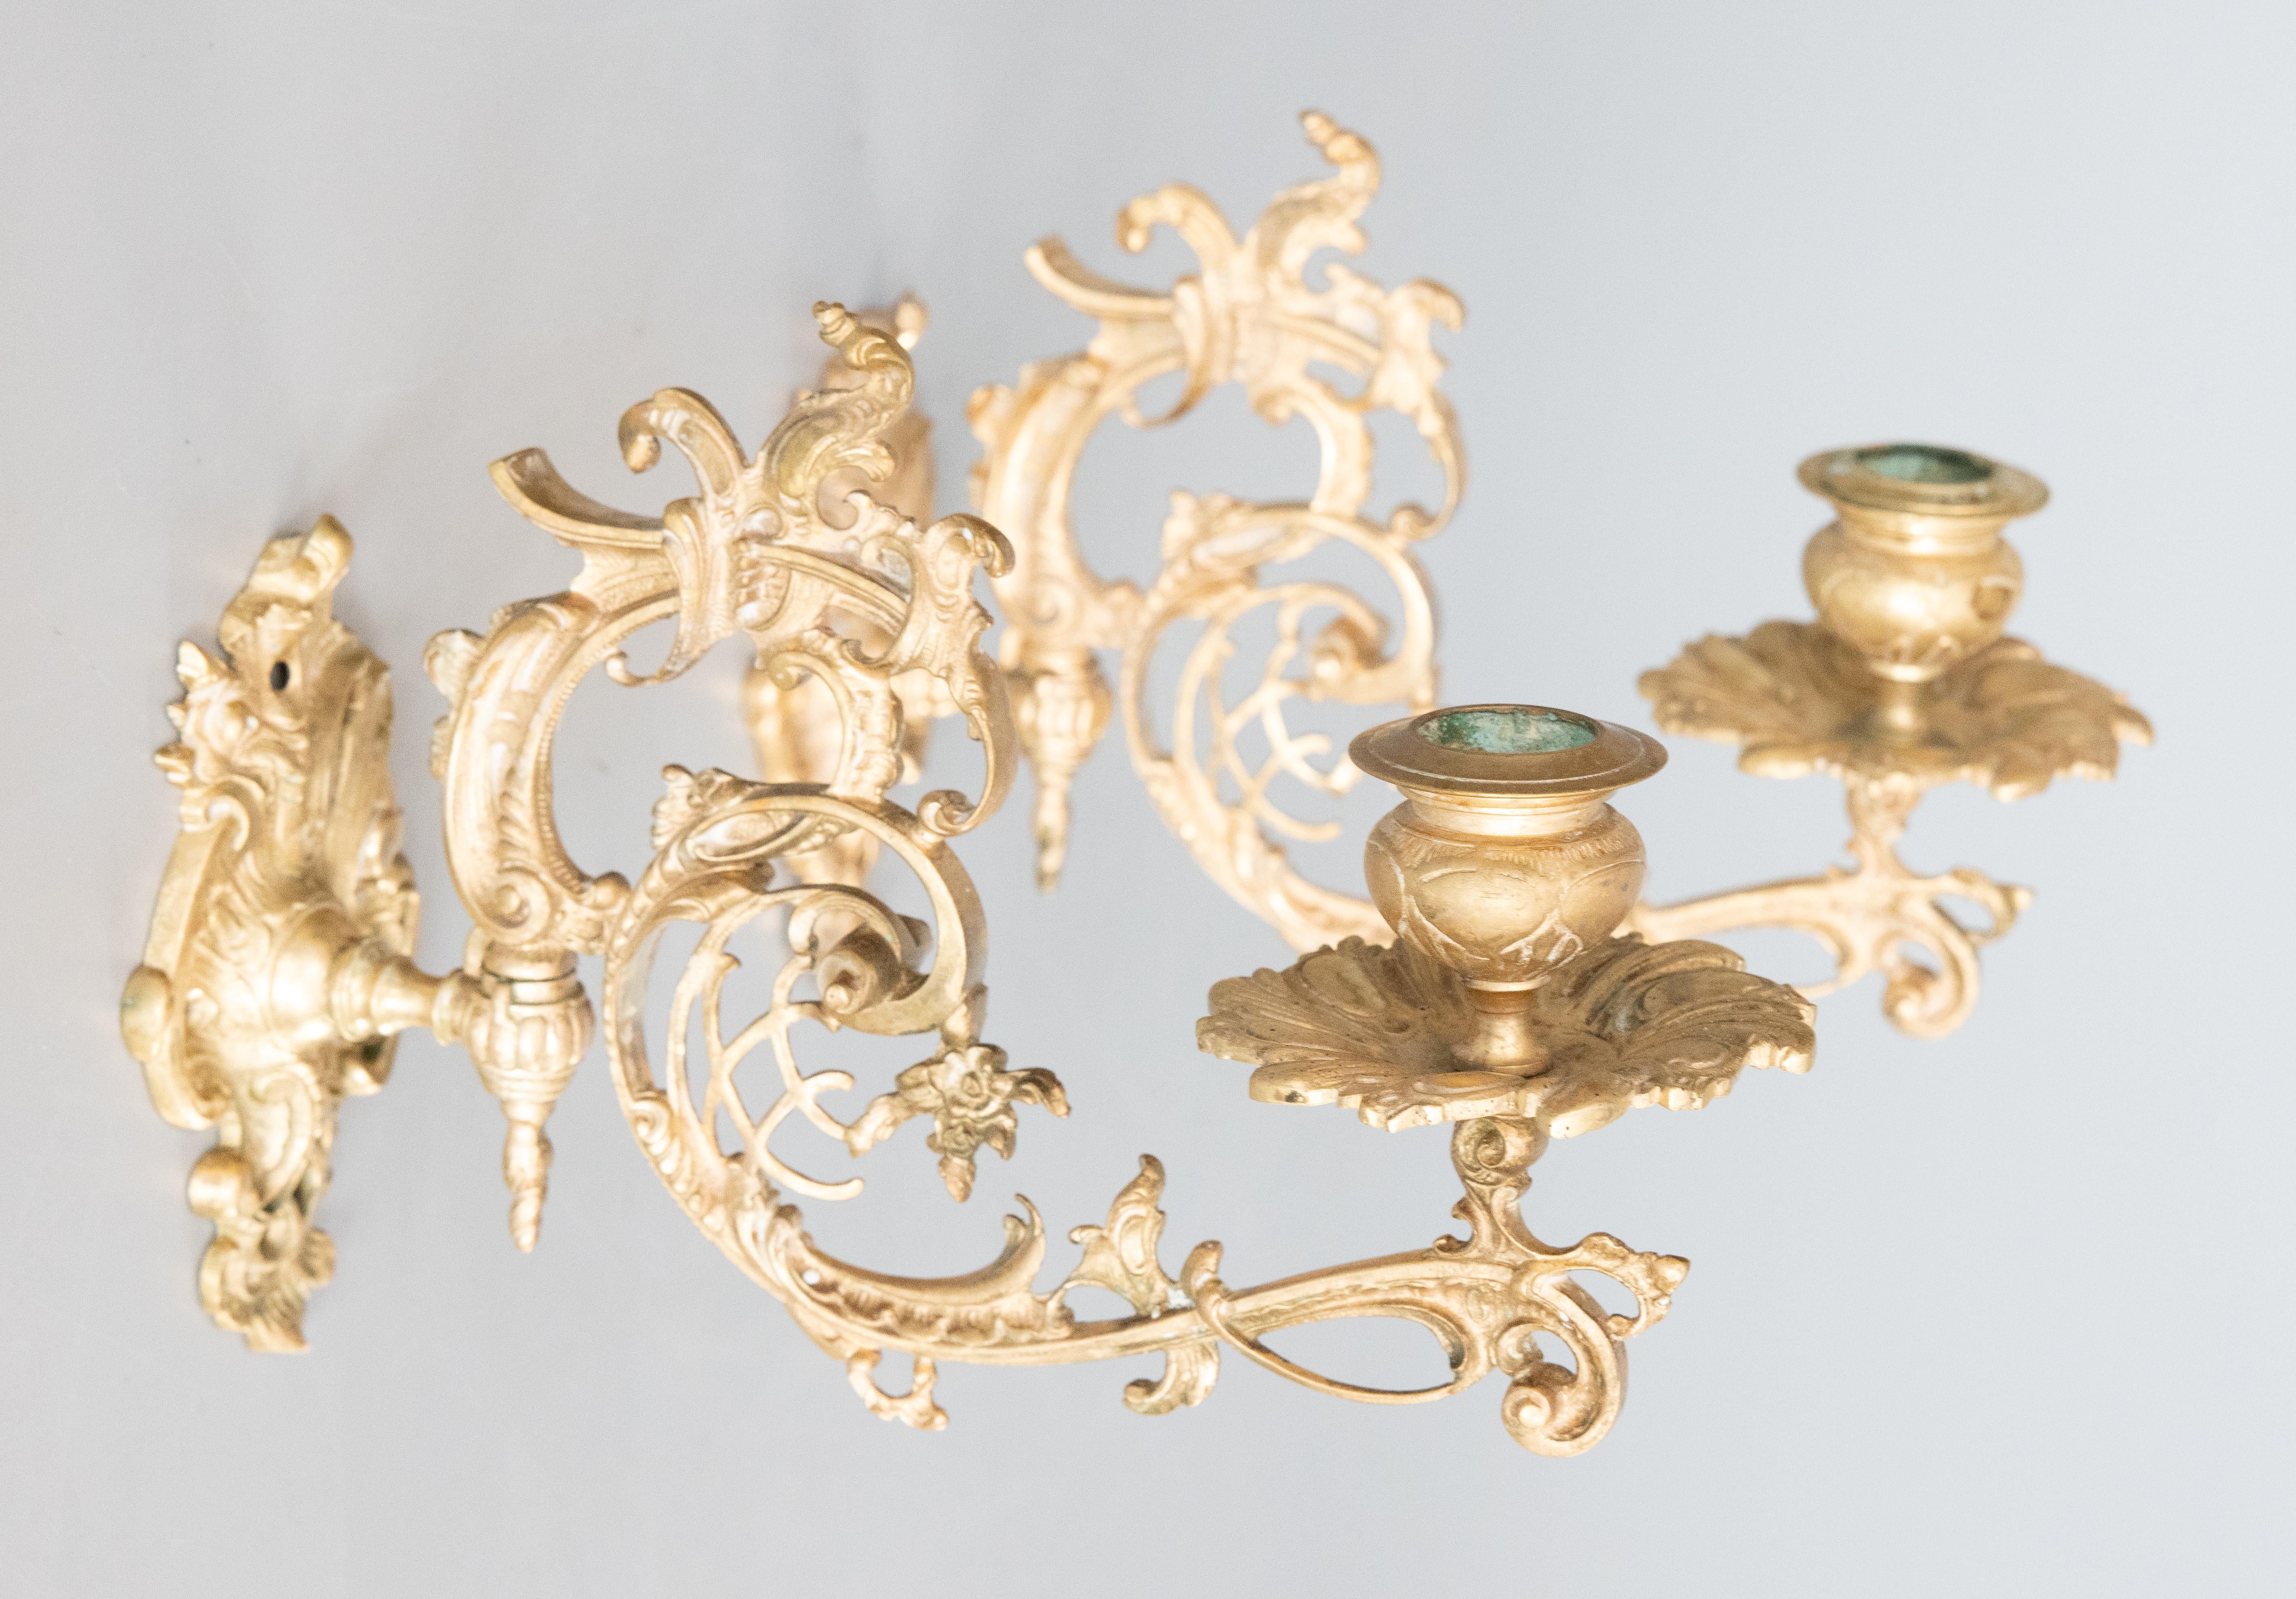 A beautiful pair of Italian gilt bronze candle sconces with openwork decor. Arms pivot to adjust position side to side. Maker's mark on the reverse. 